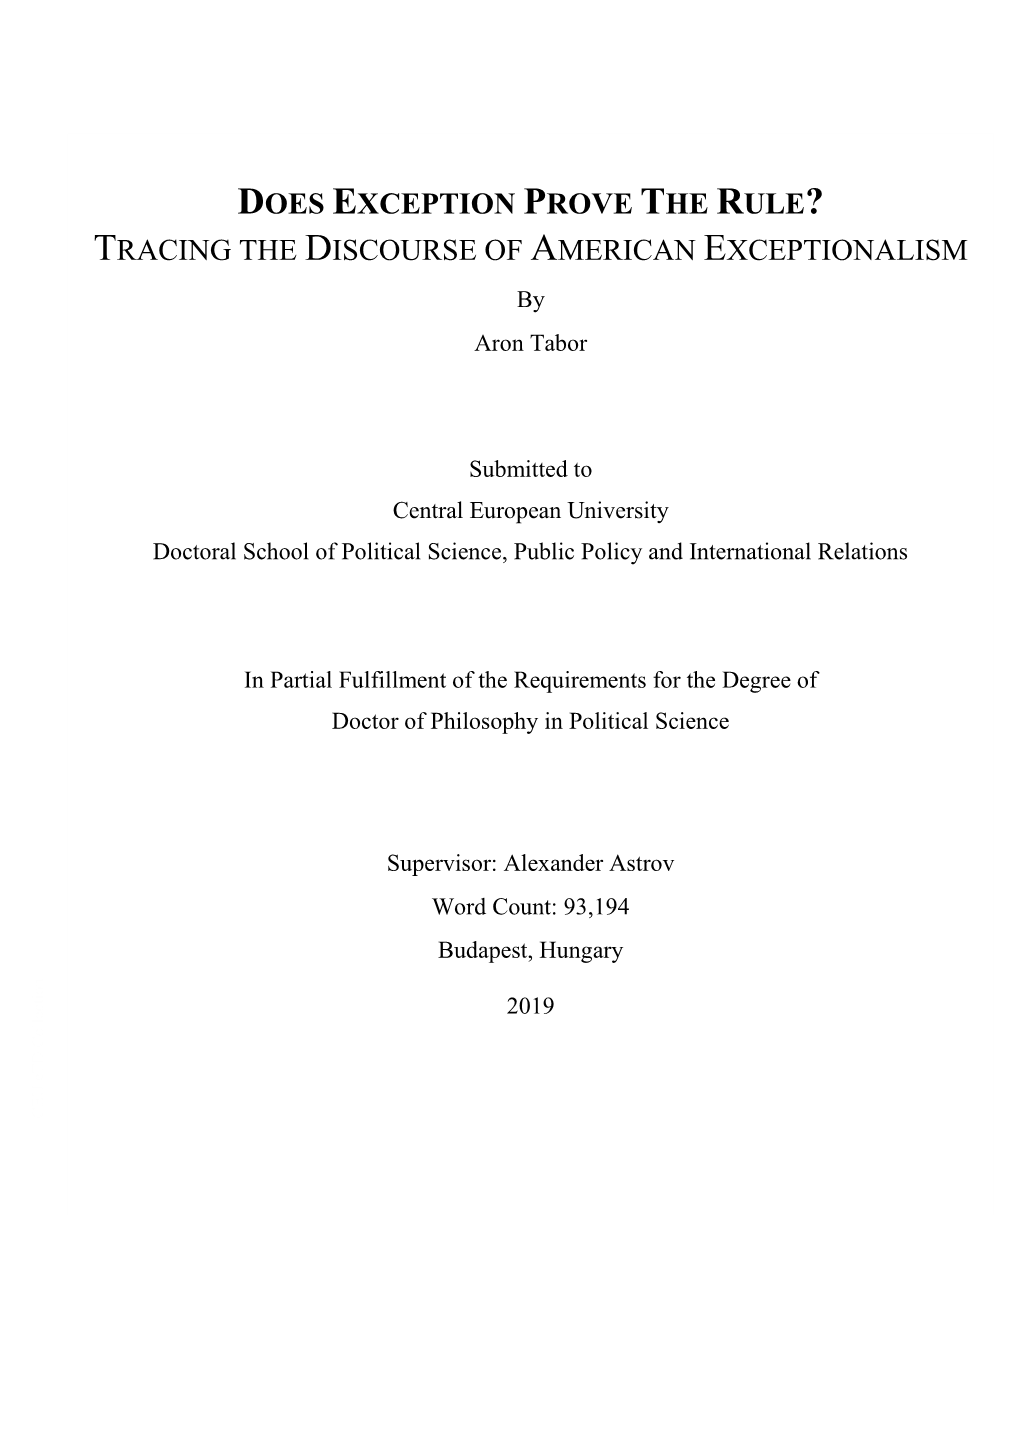 TRACING the DISCOURSE of AMERICAN EXCEPTIONALISM by Aron Tabor